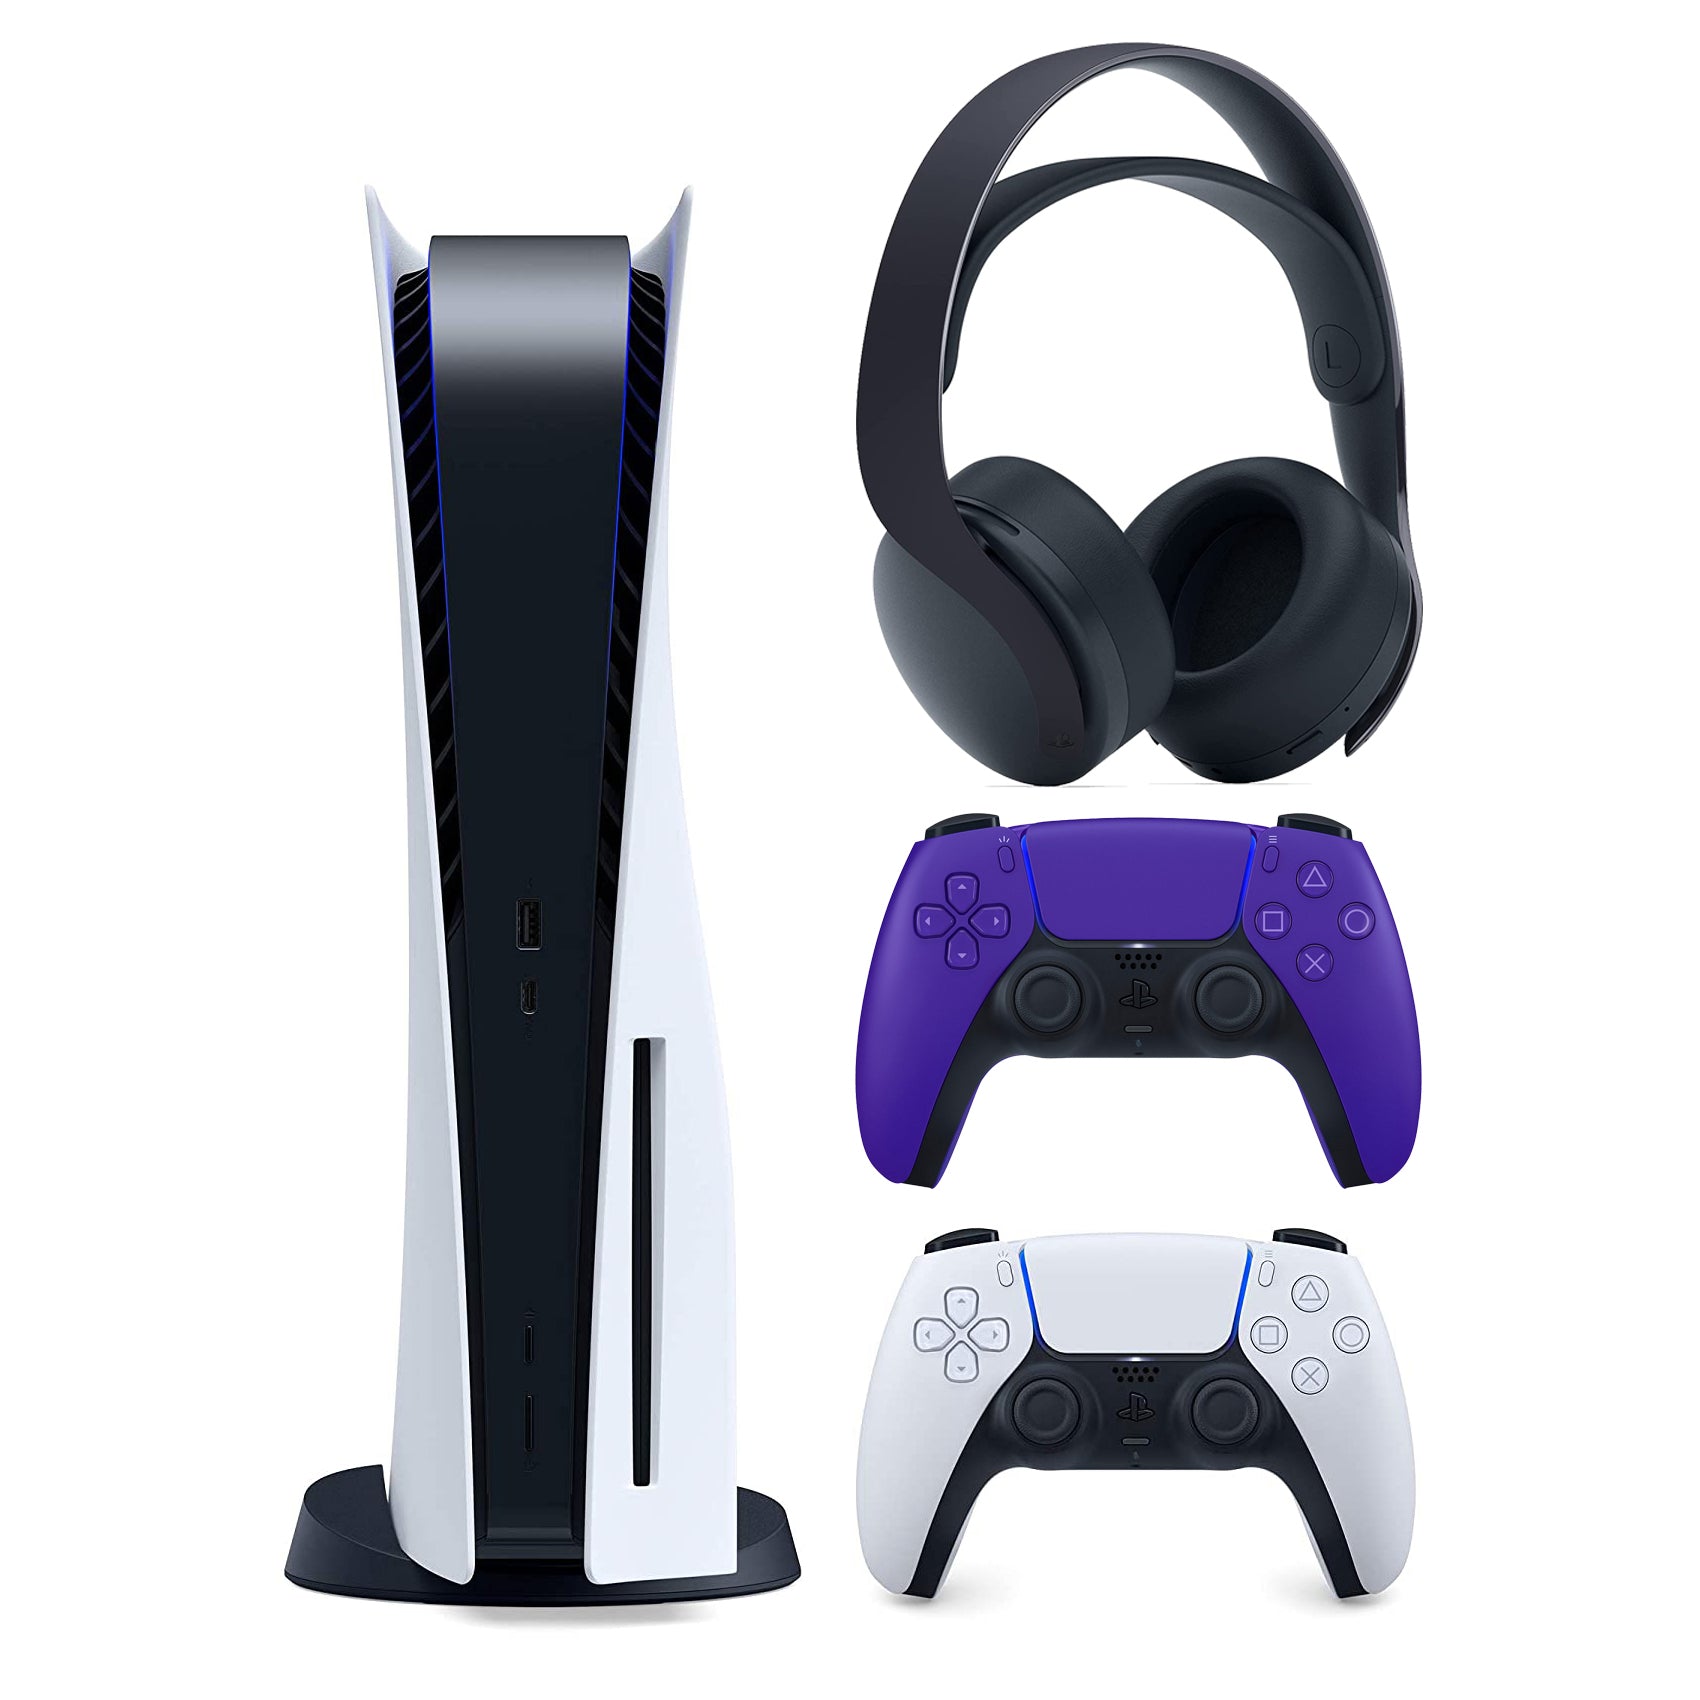 Sony Playstation 5 Disc Version (Sony PS5 Disc) with Extra Galactic Purple Controller and Black PULSE 3D Headset Bundle - Pro-Distributing